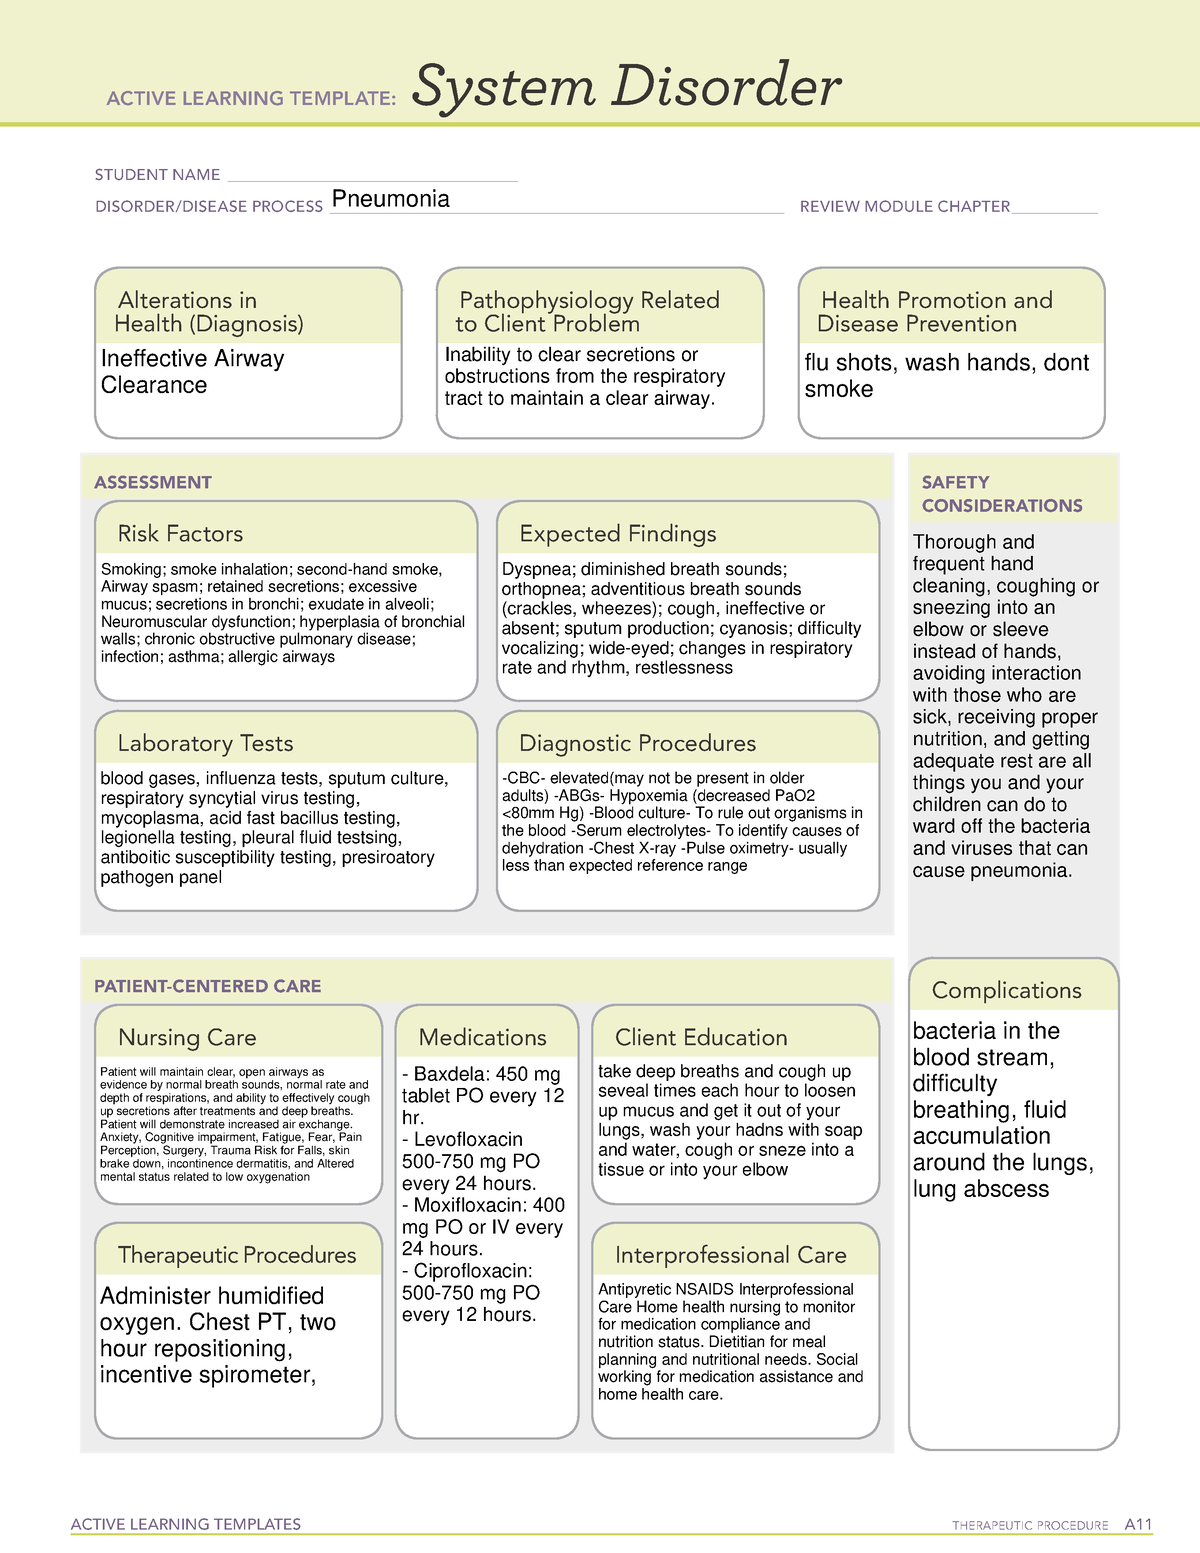 Pneumonia System Disorder Template ACTIVE LEARNING TEMPLATES THERAPEUTIC PROCEDURE A System